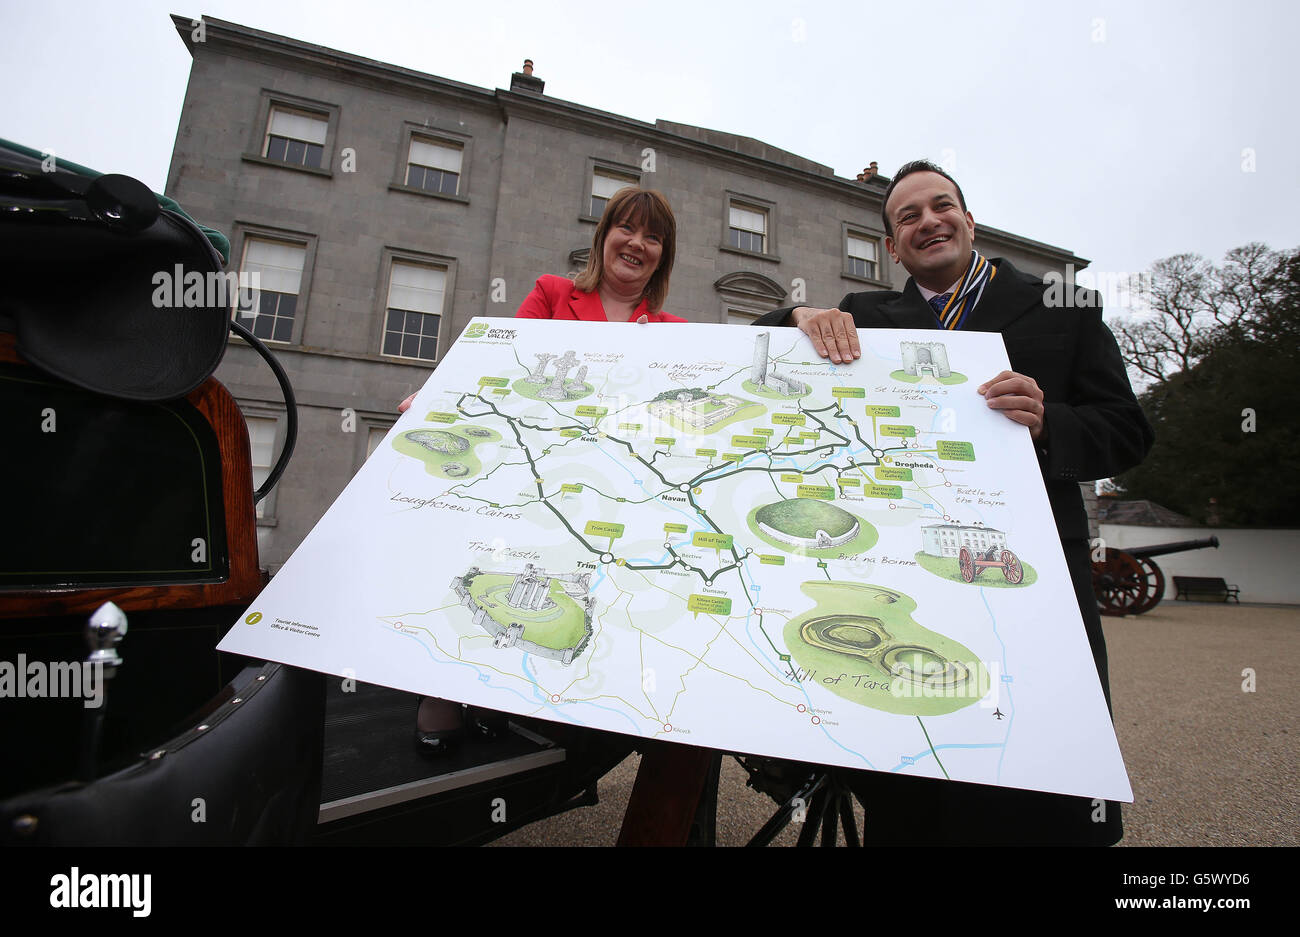 L-R Failte Ireland development officer Martina O'Dwyer and Tourism Minister Leo Varadkar hold a map of the new Boyne Valley tourist route at the site of the Battle of The Boyne near Droghed. The photocall was part of the launch of The Boyne Valley Drive, 225 kilometers in length and taking in 22 historic sites along the way, is a collaborative project between Failte Ireland and the local authorities in Meath and Louth which seeks to revitalise the region and promote it as a must-visit destination for overseas tourists. Stock Photo